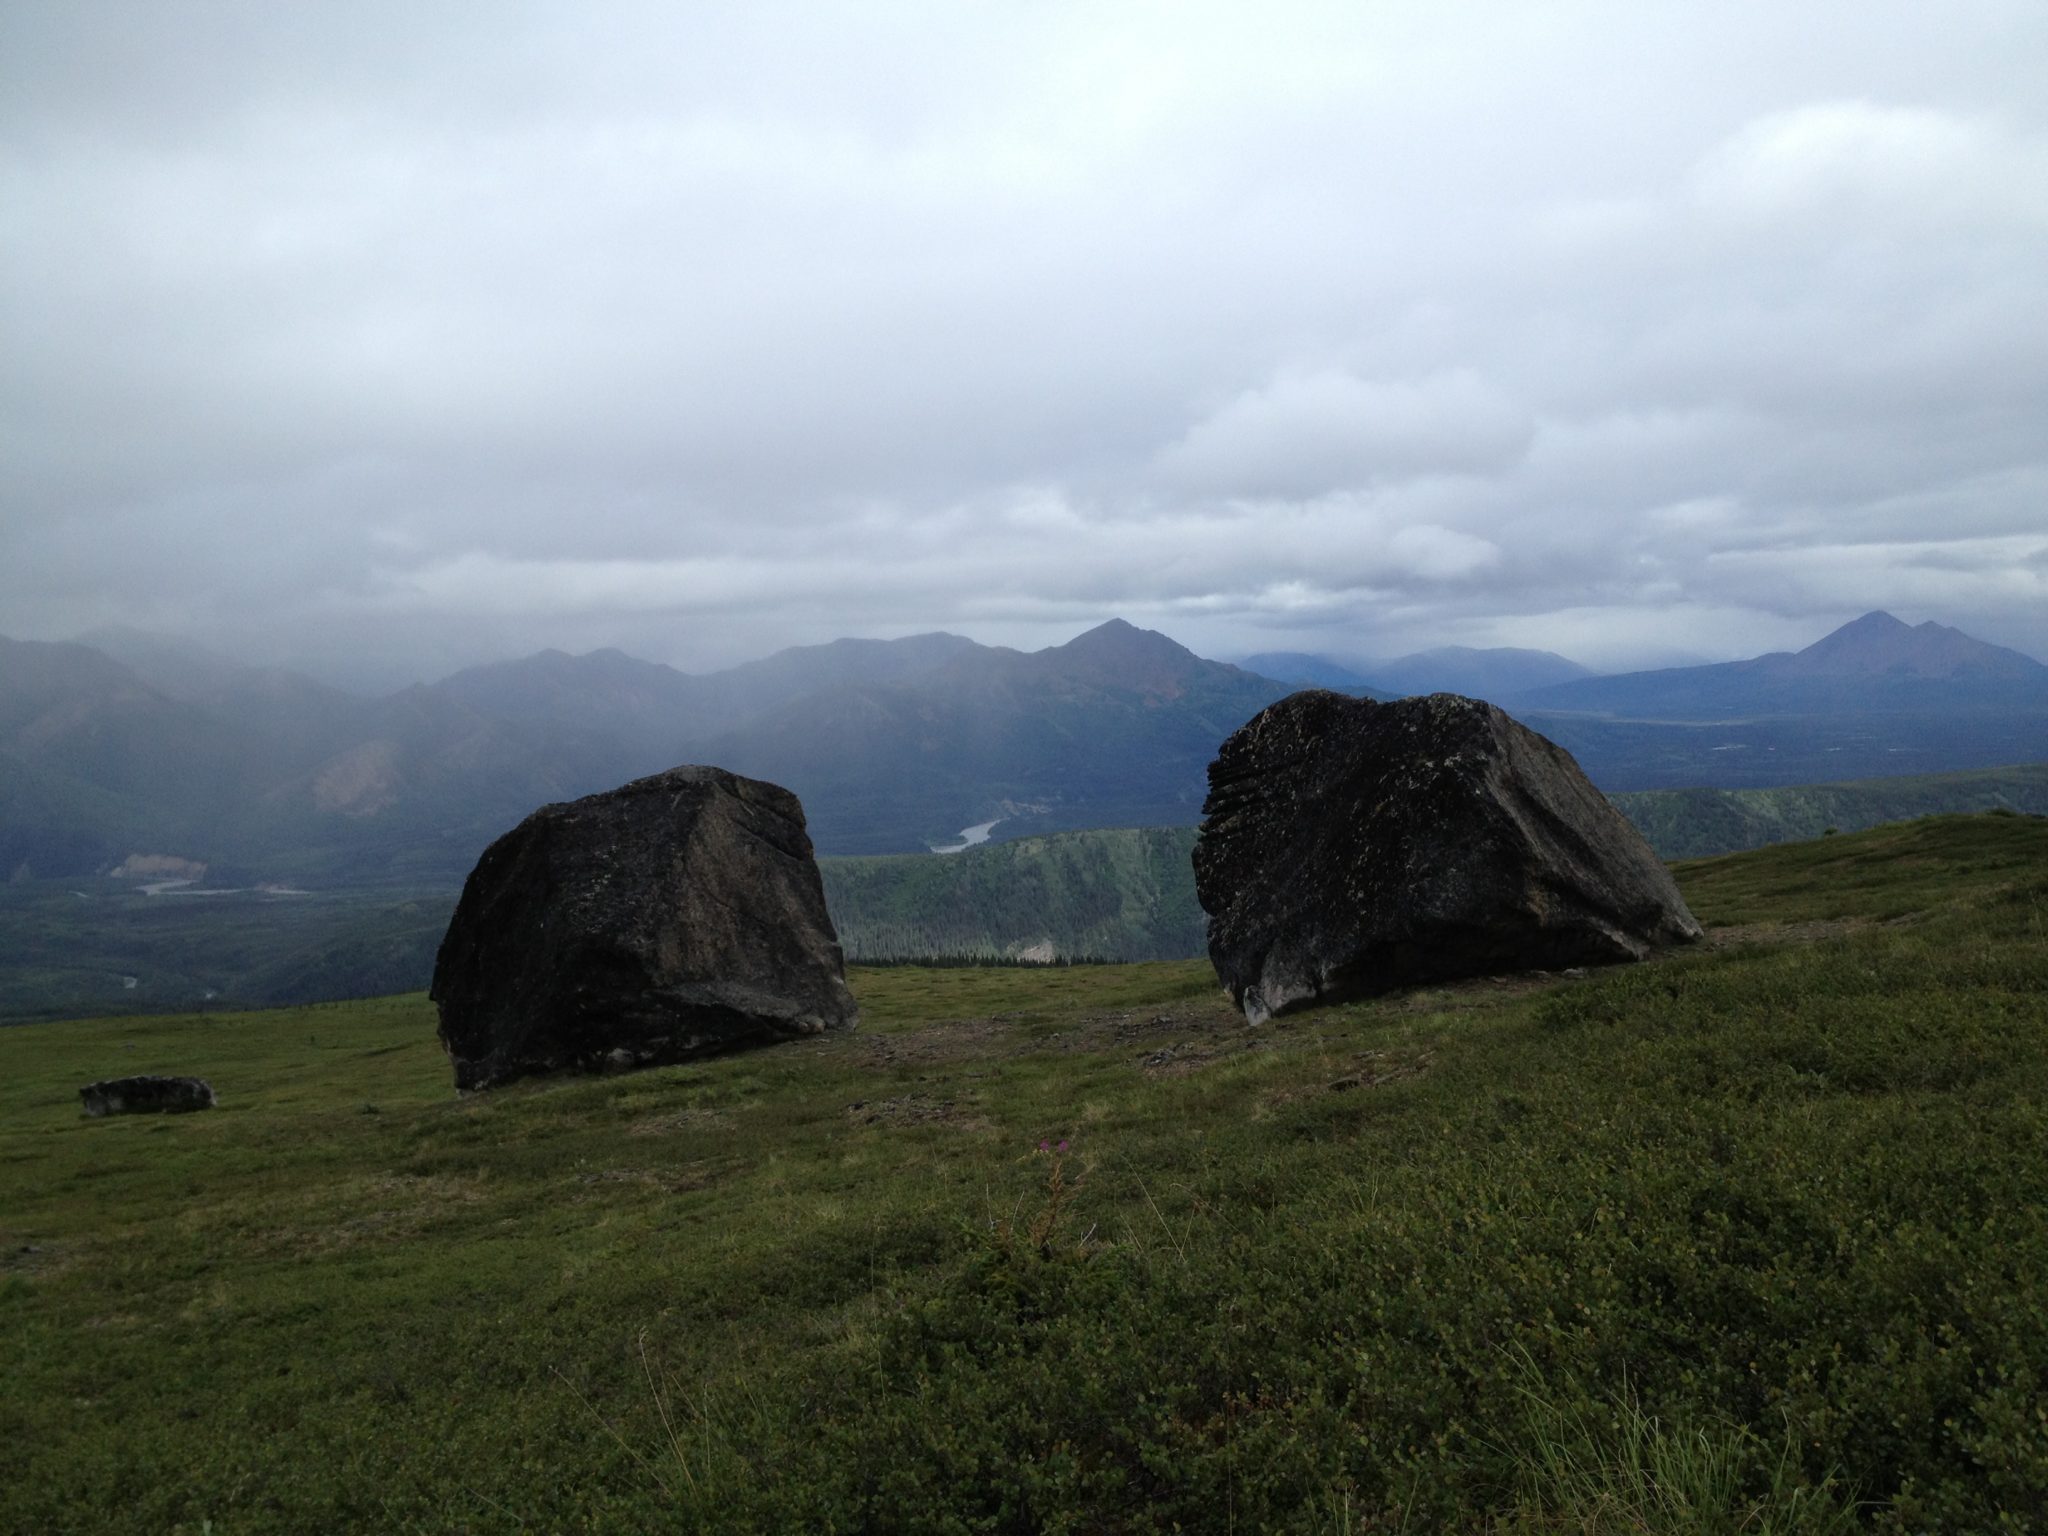 Two giant glacial erratics left from when there were glaciers on this hillside thousands of years ago